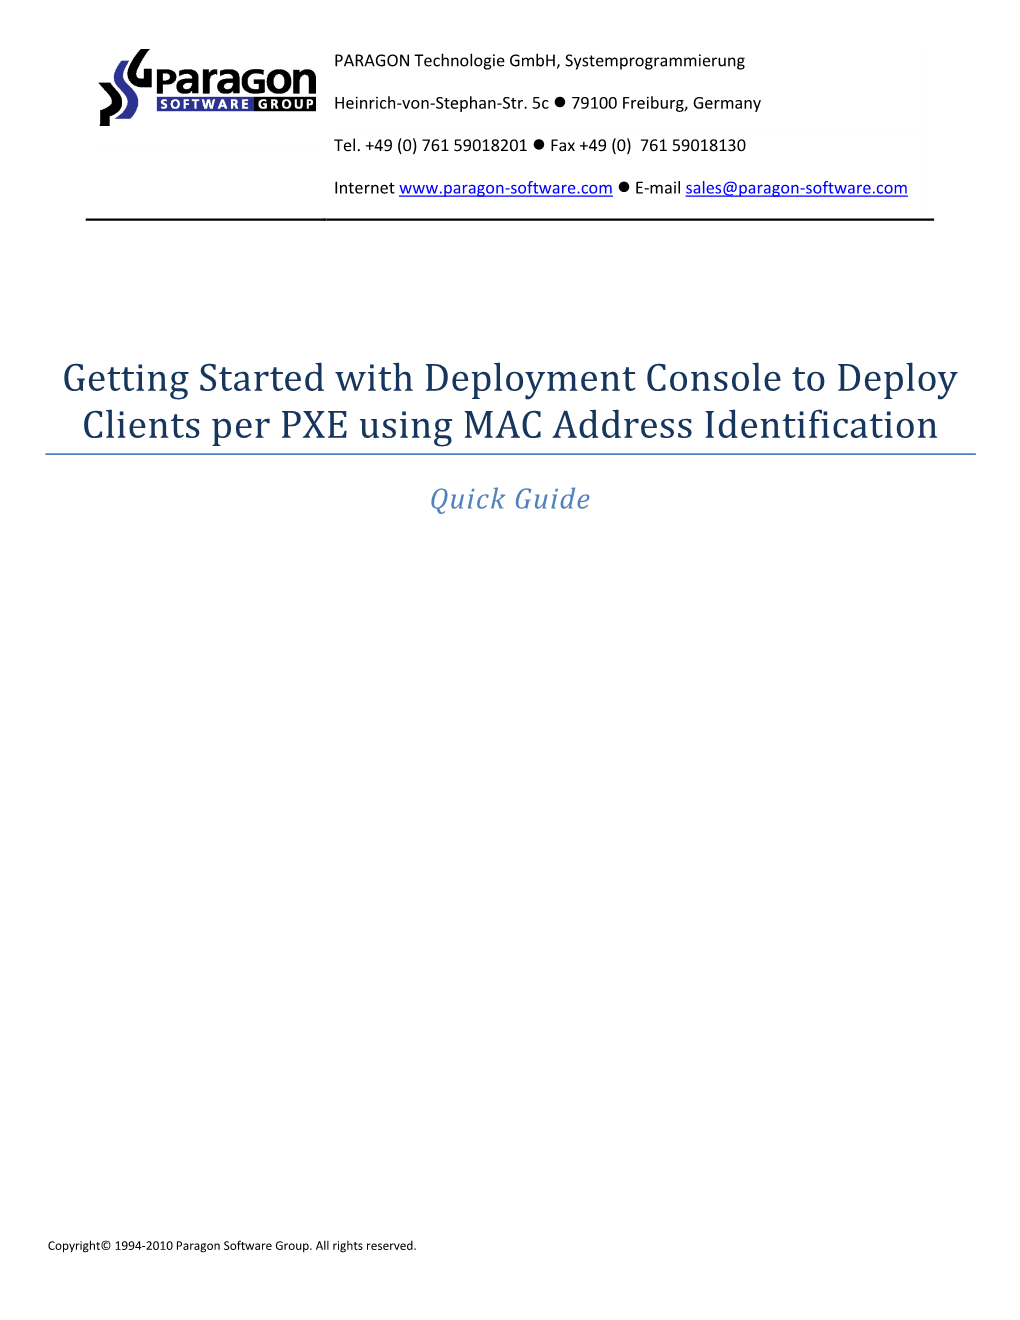 Getting Started with the Deployment Console and Deploying the Clients